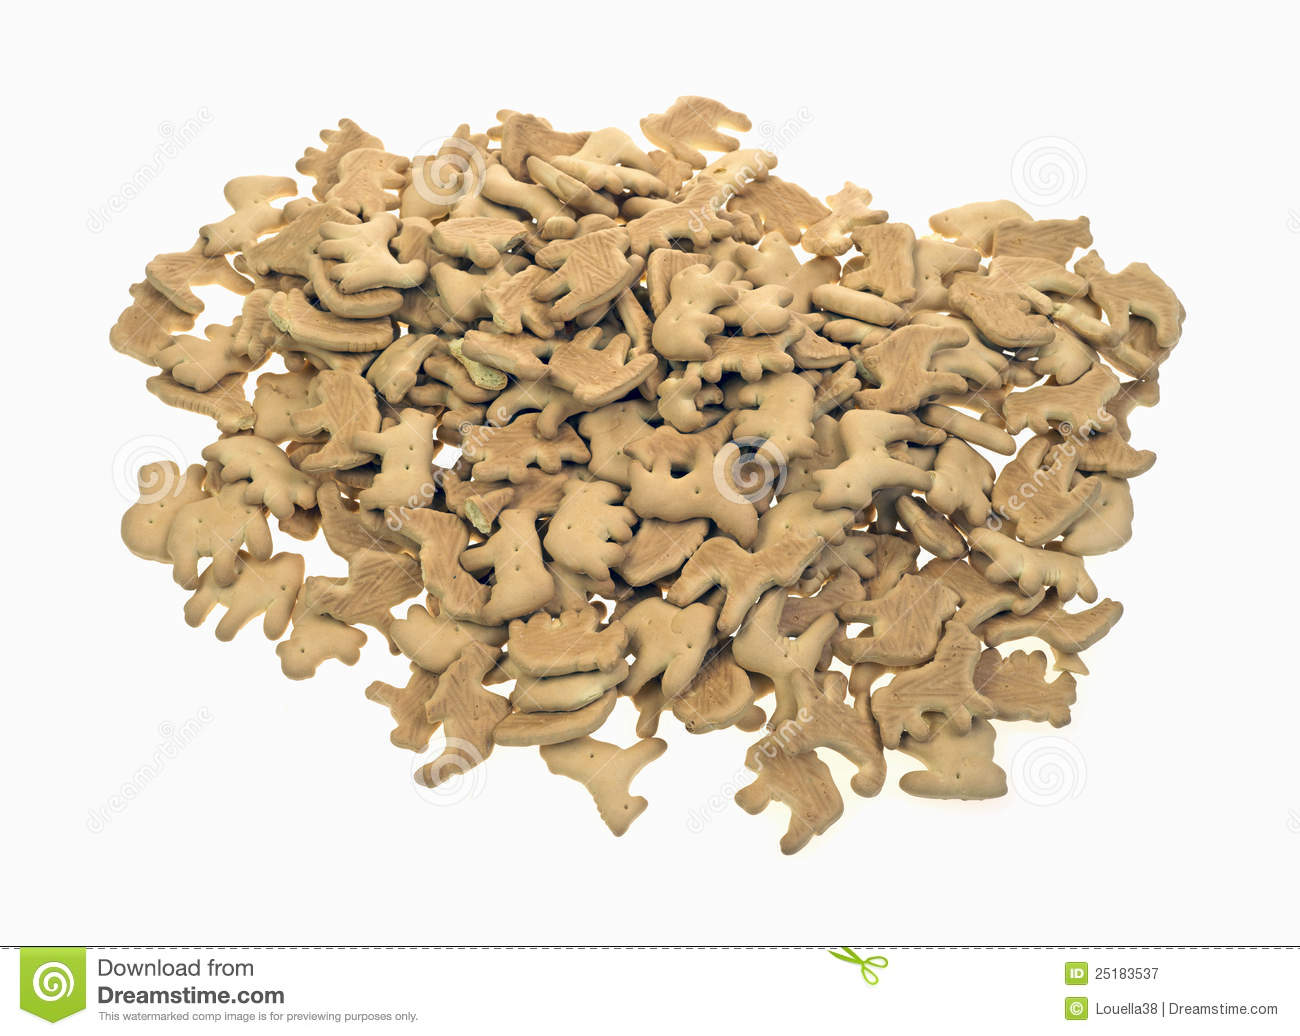 Animal Crackers In Pile Royalty Free Stock Photography   Image